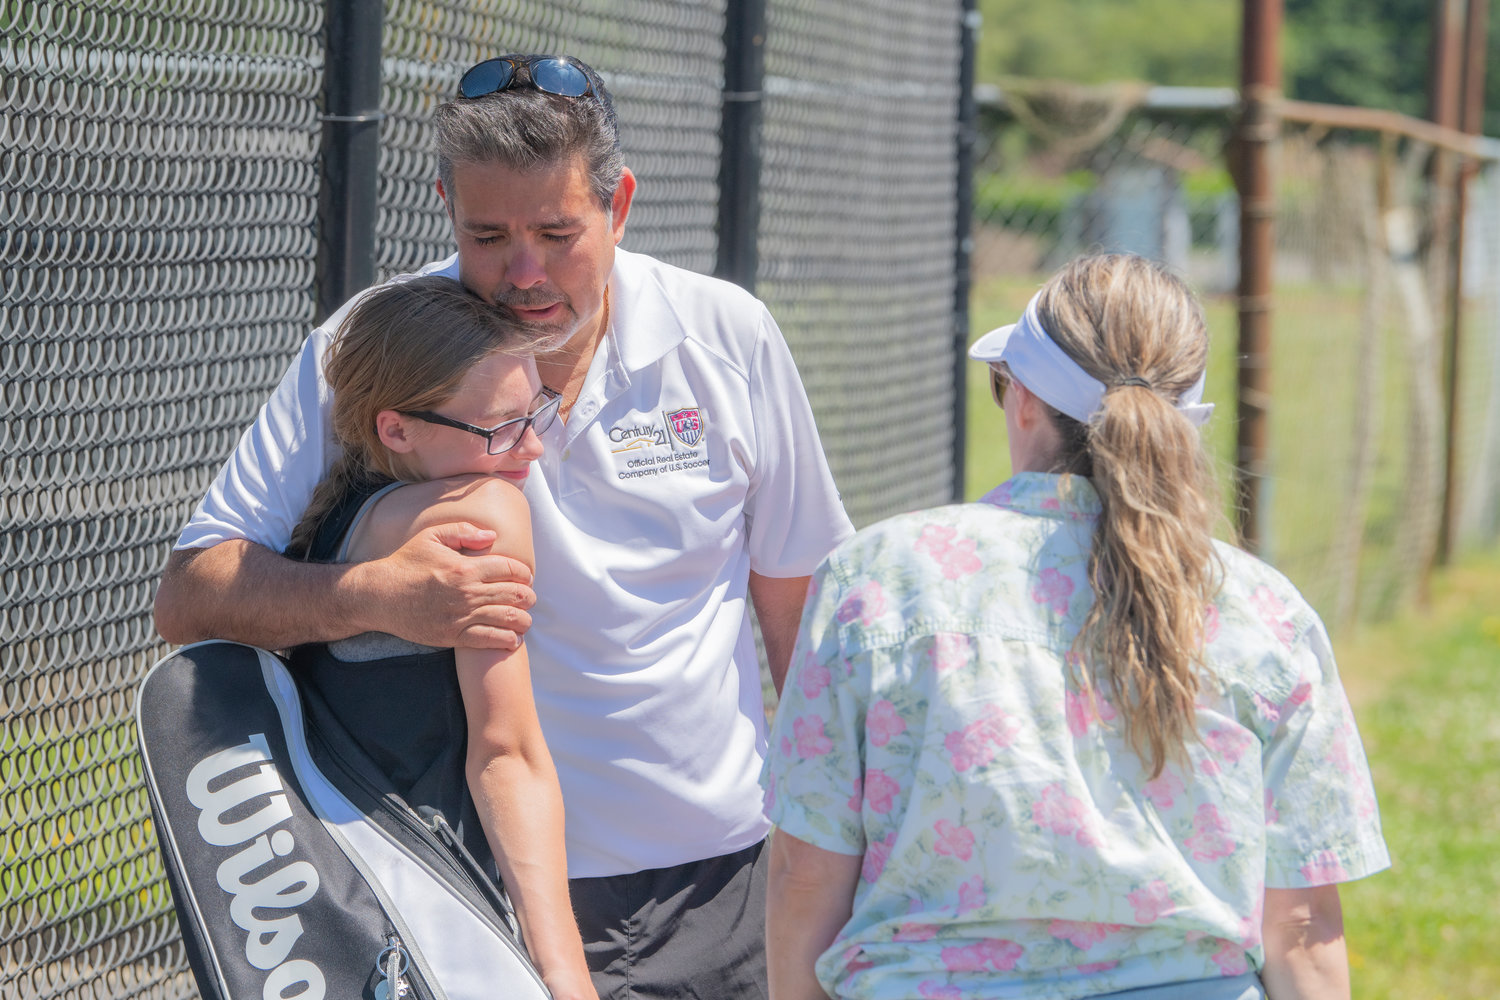 Katelyn Wood embraces Walter Cuestas during the Jack State Tennis Tournament at W.F. West High School on Saturday.